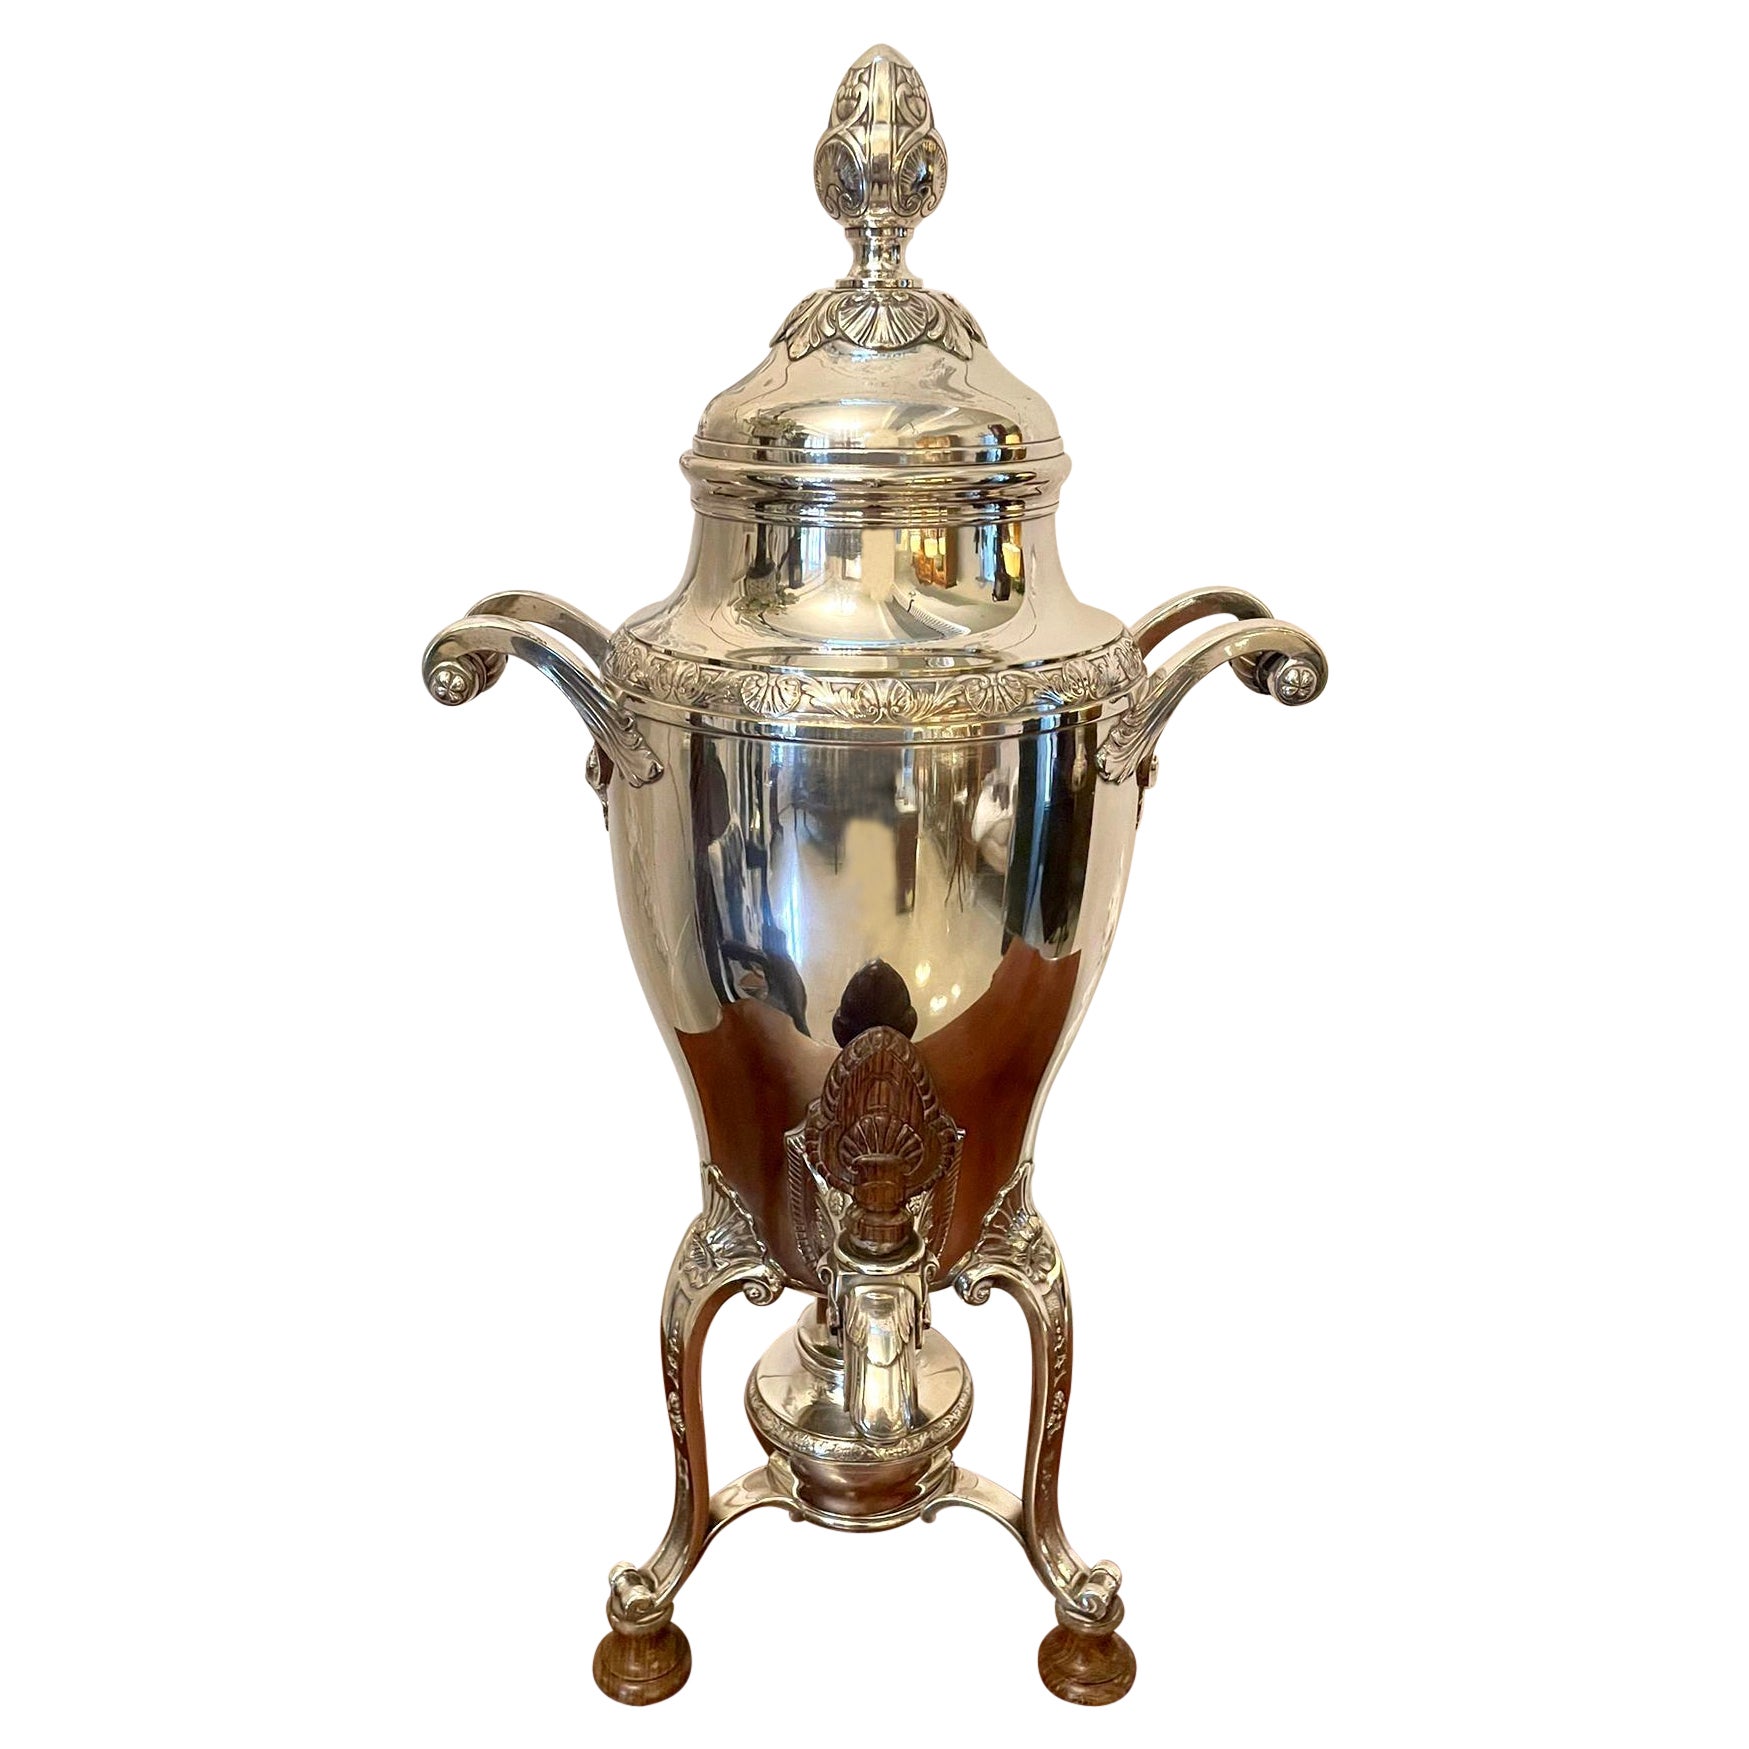 Fine Quality Antique Victorian French Silver Plated Tea Urn by Risler and Carré